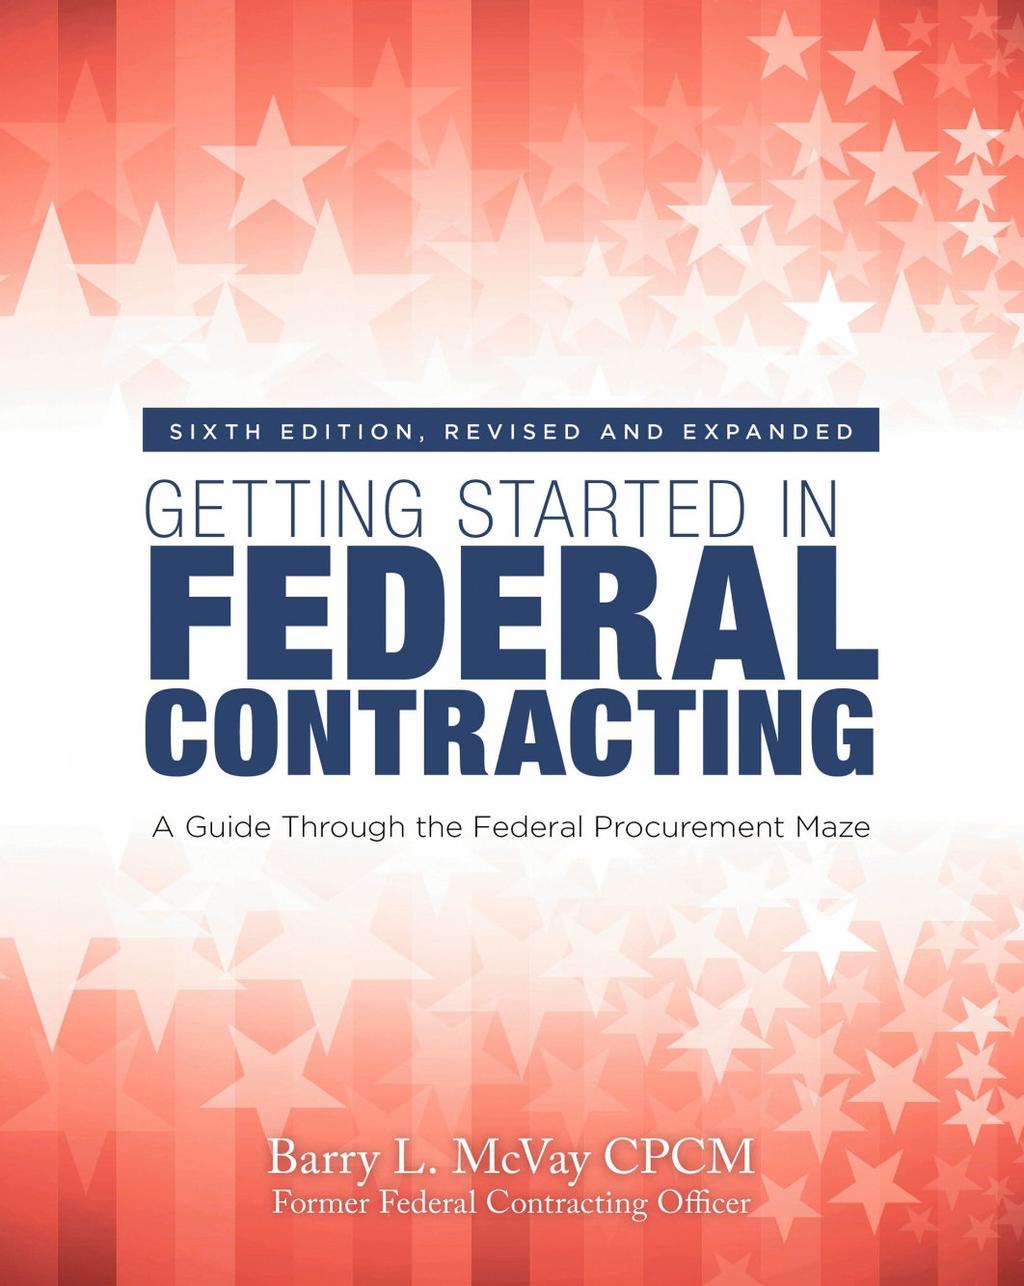 REVISED AND EXPANDED! 468 pages, 2017, ISBN: 978-0-912481-27-2, $39.95 from Panoptic Enterprises (http://www.fedgovcontracts.com) and from Amazon.com To see: Table of Contents, go to http://www.